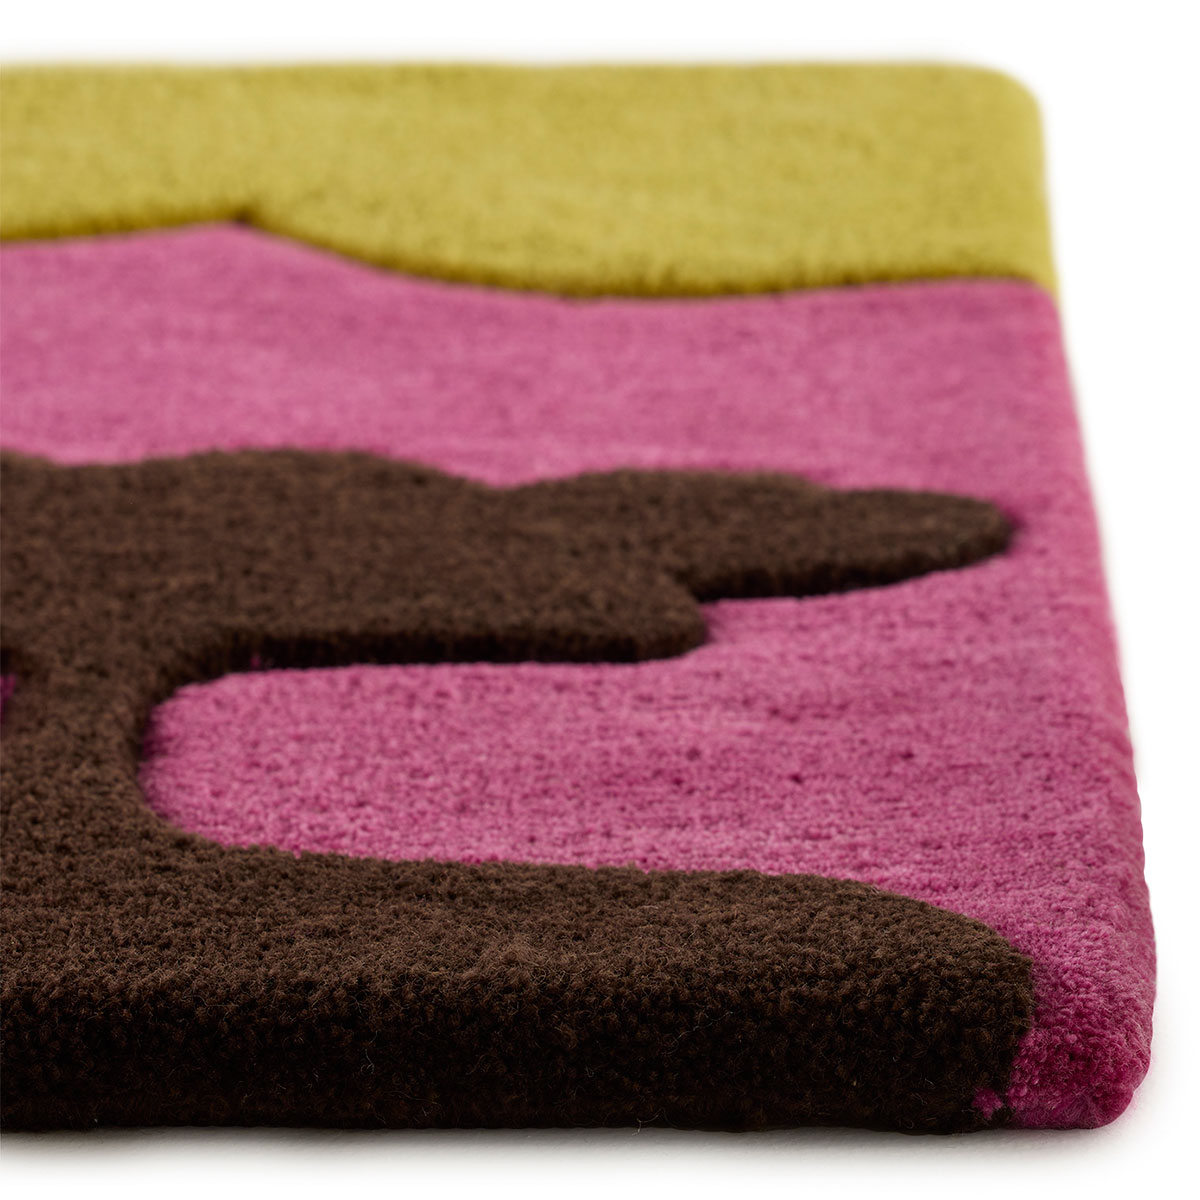 The corner detail of a pink and yellow rug with a scene of abstract trees on it called Island Family Sunset.